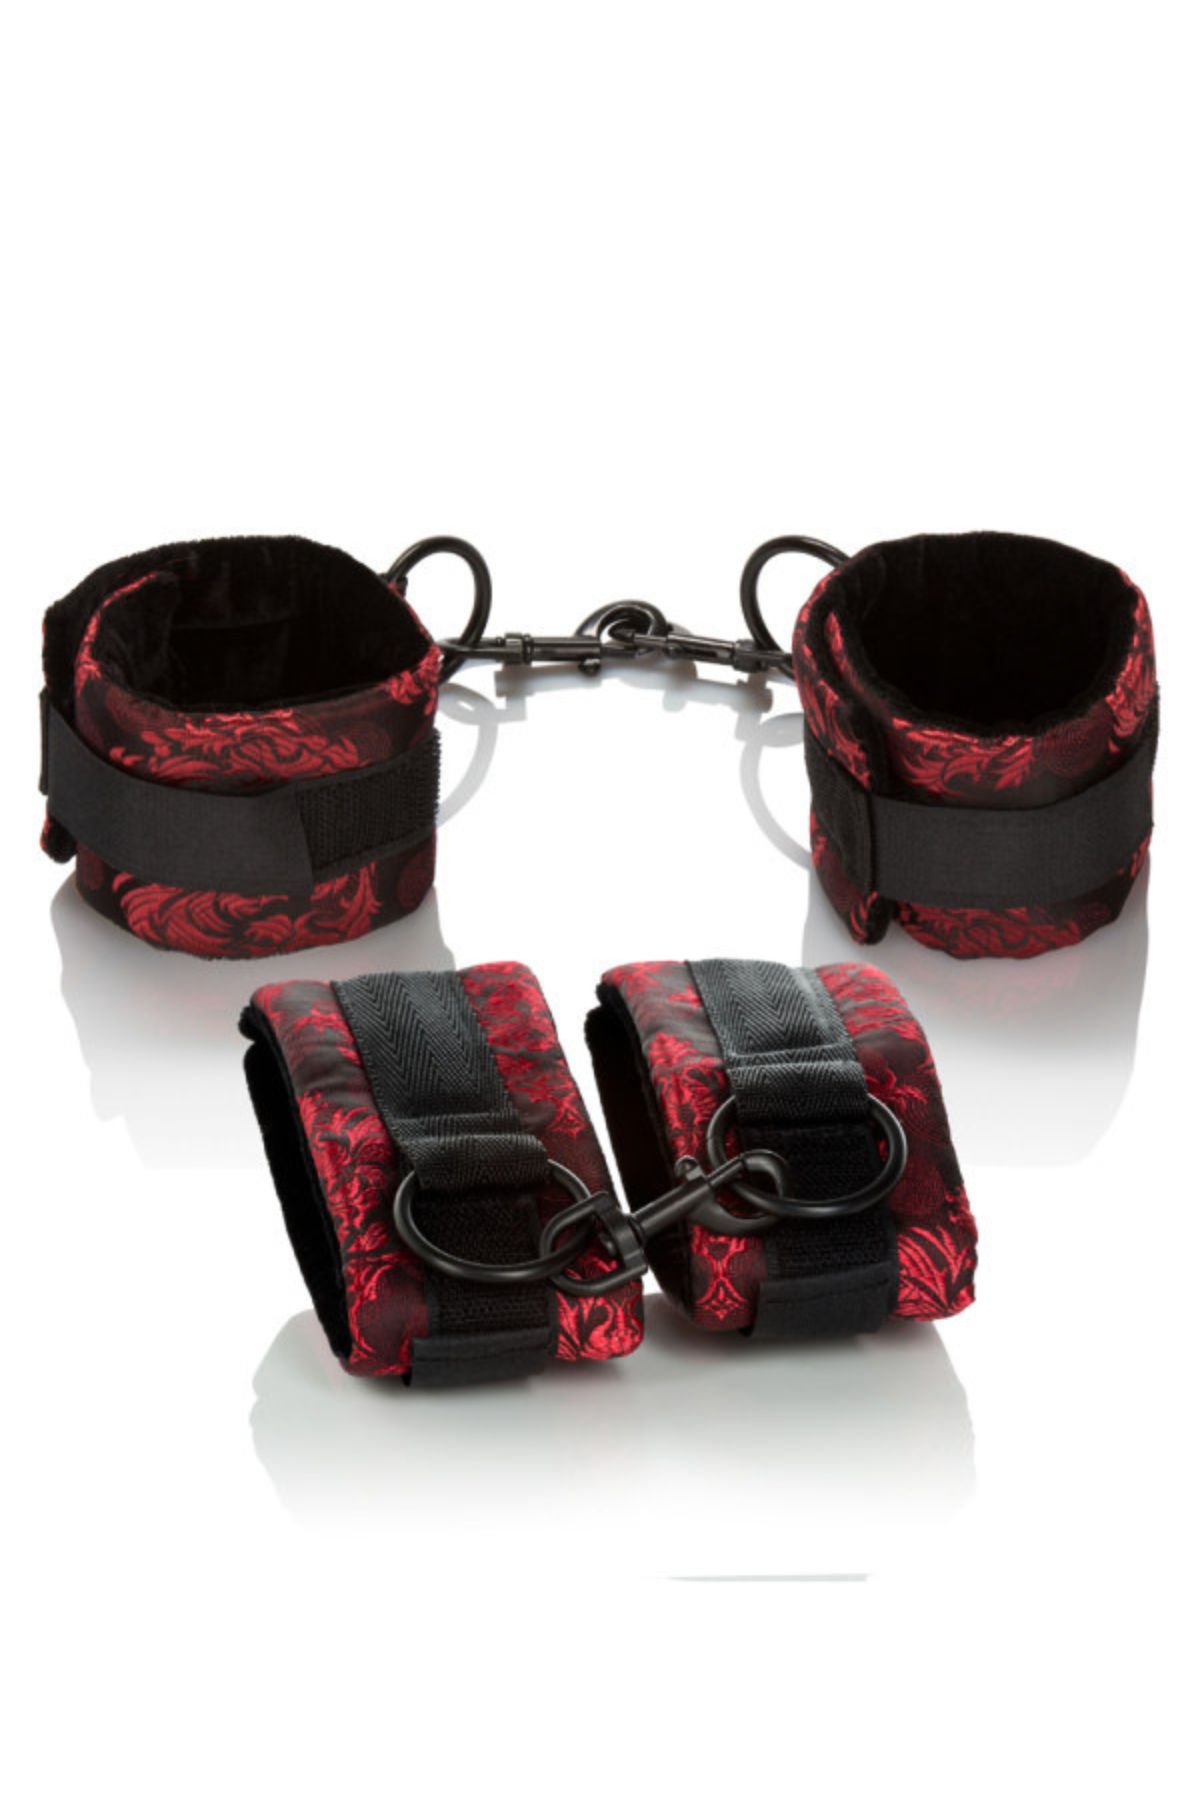 black and red sexual restraints